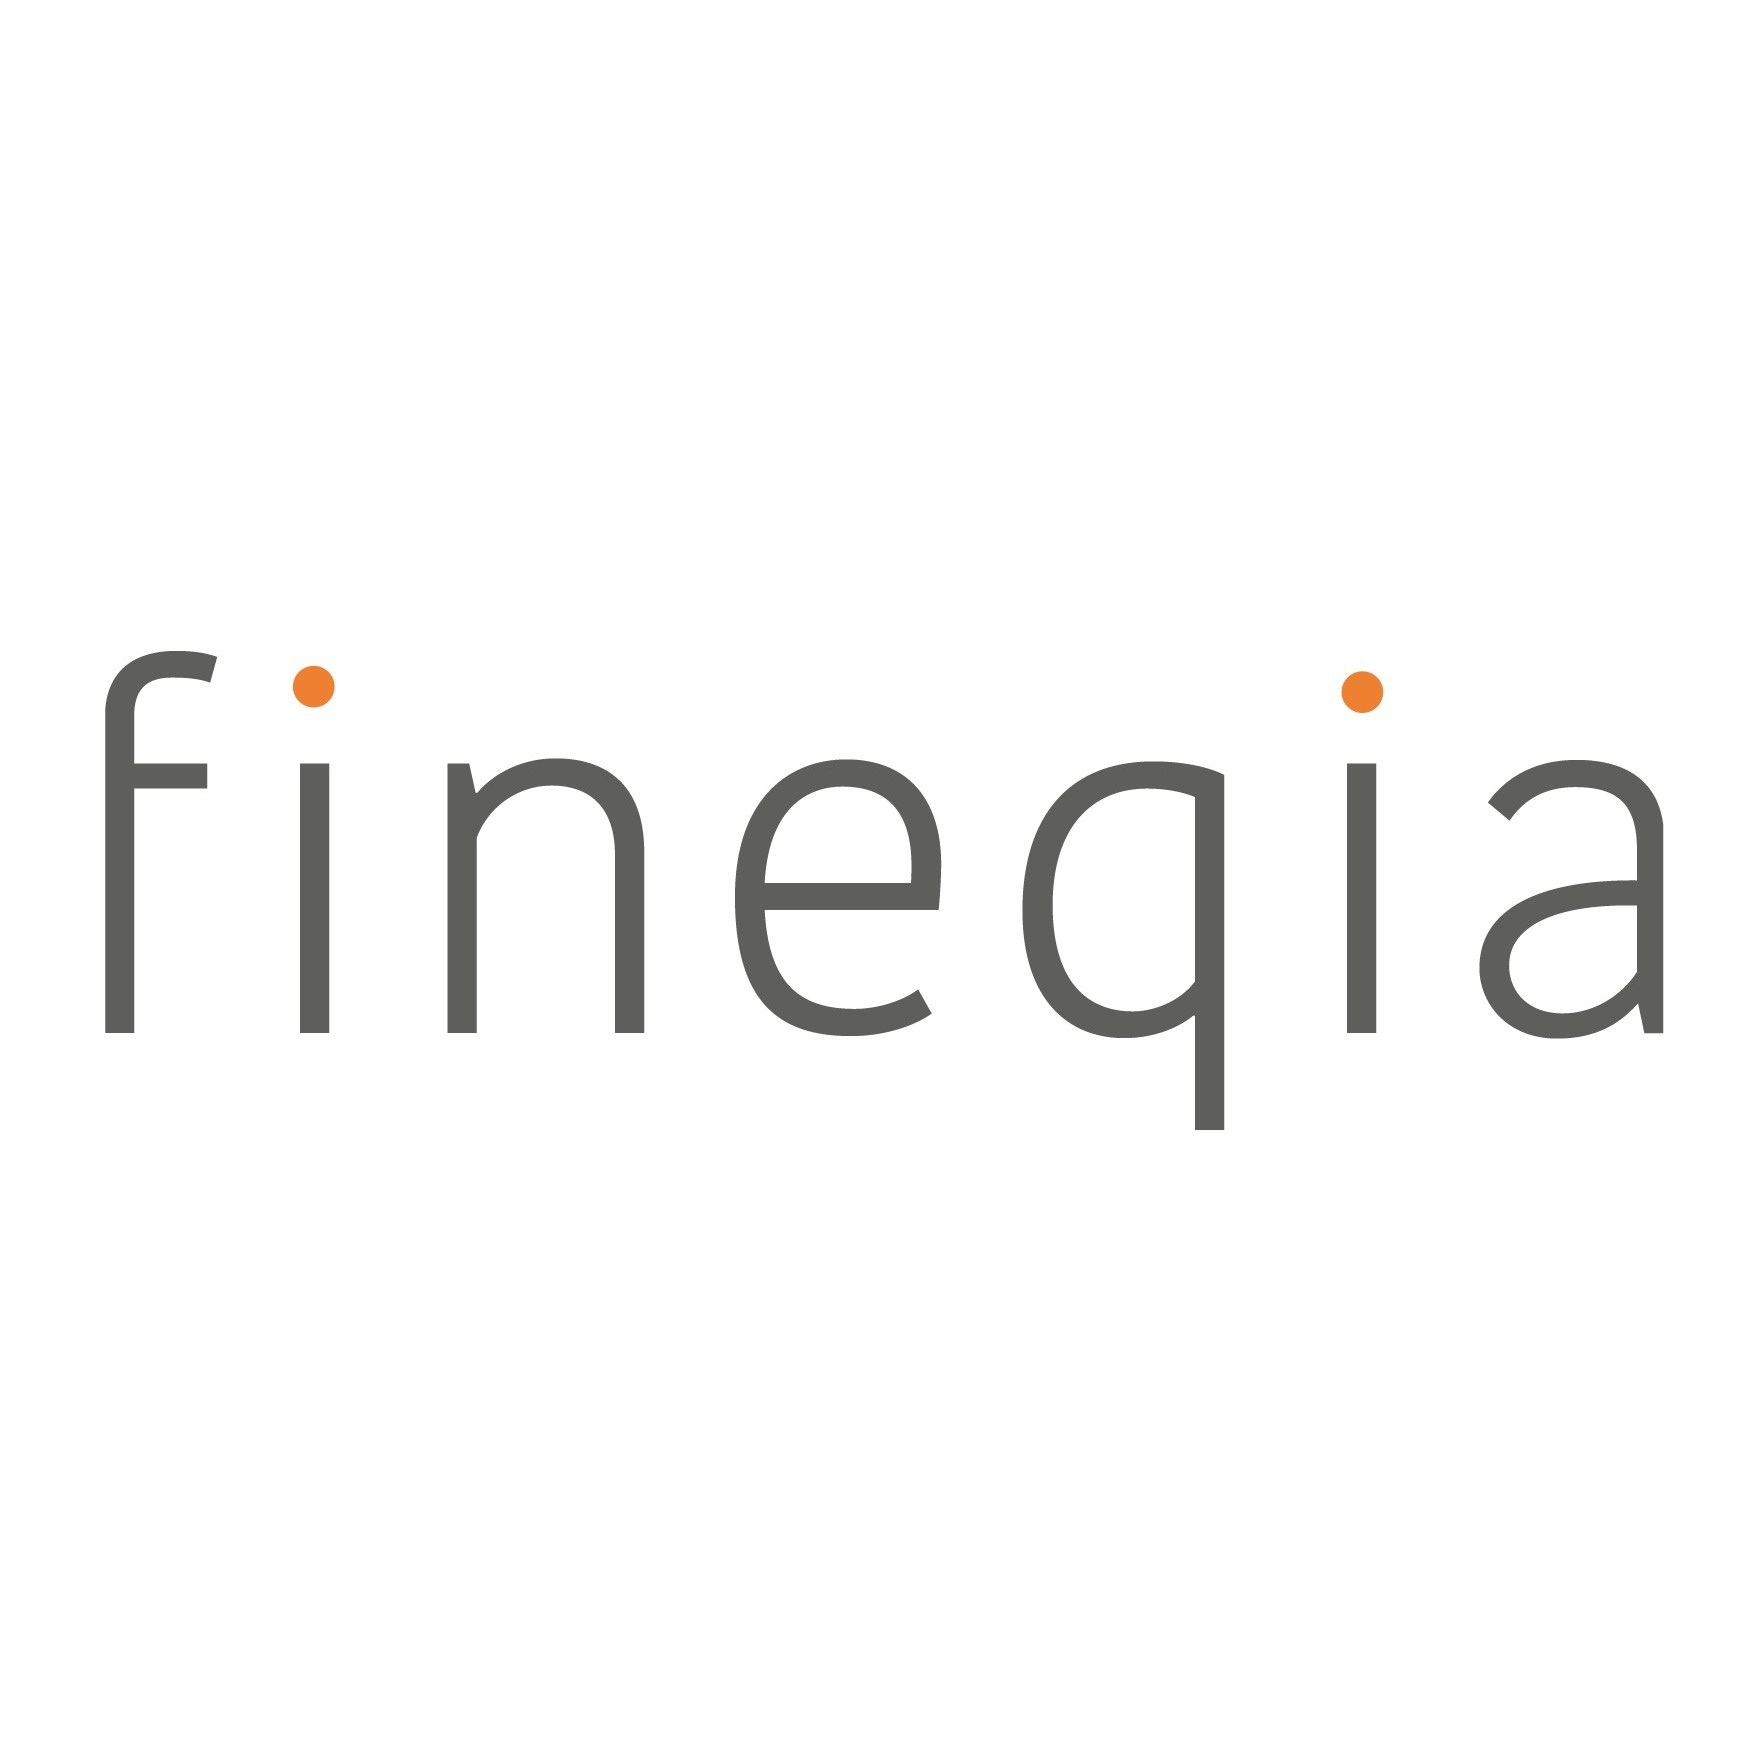 Fineqia Announces Investment in Blockchain-Focused Wave Financial Group